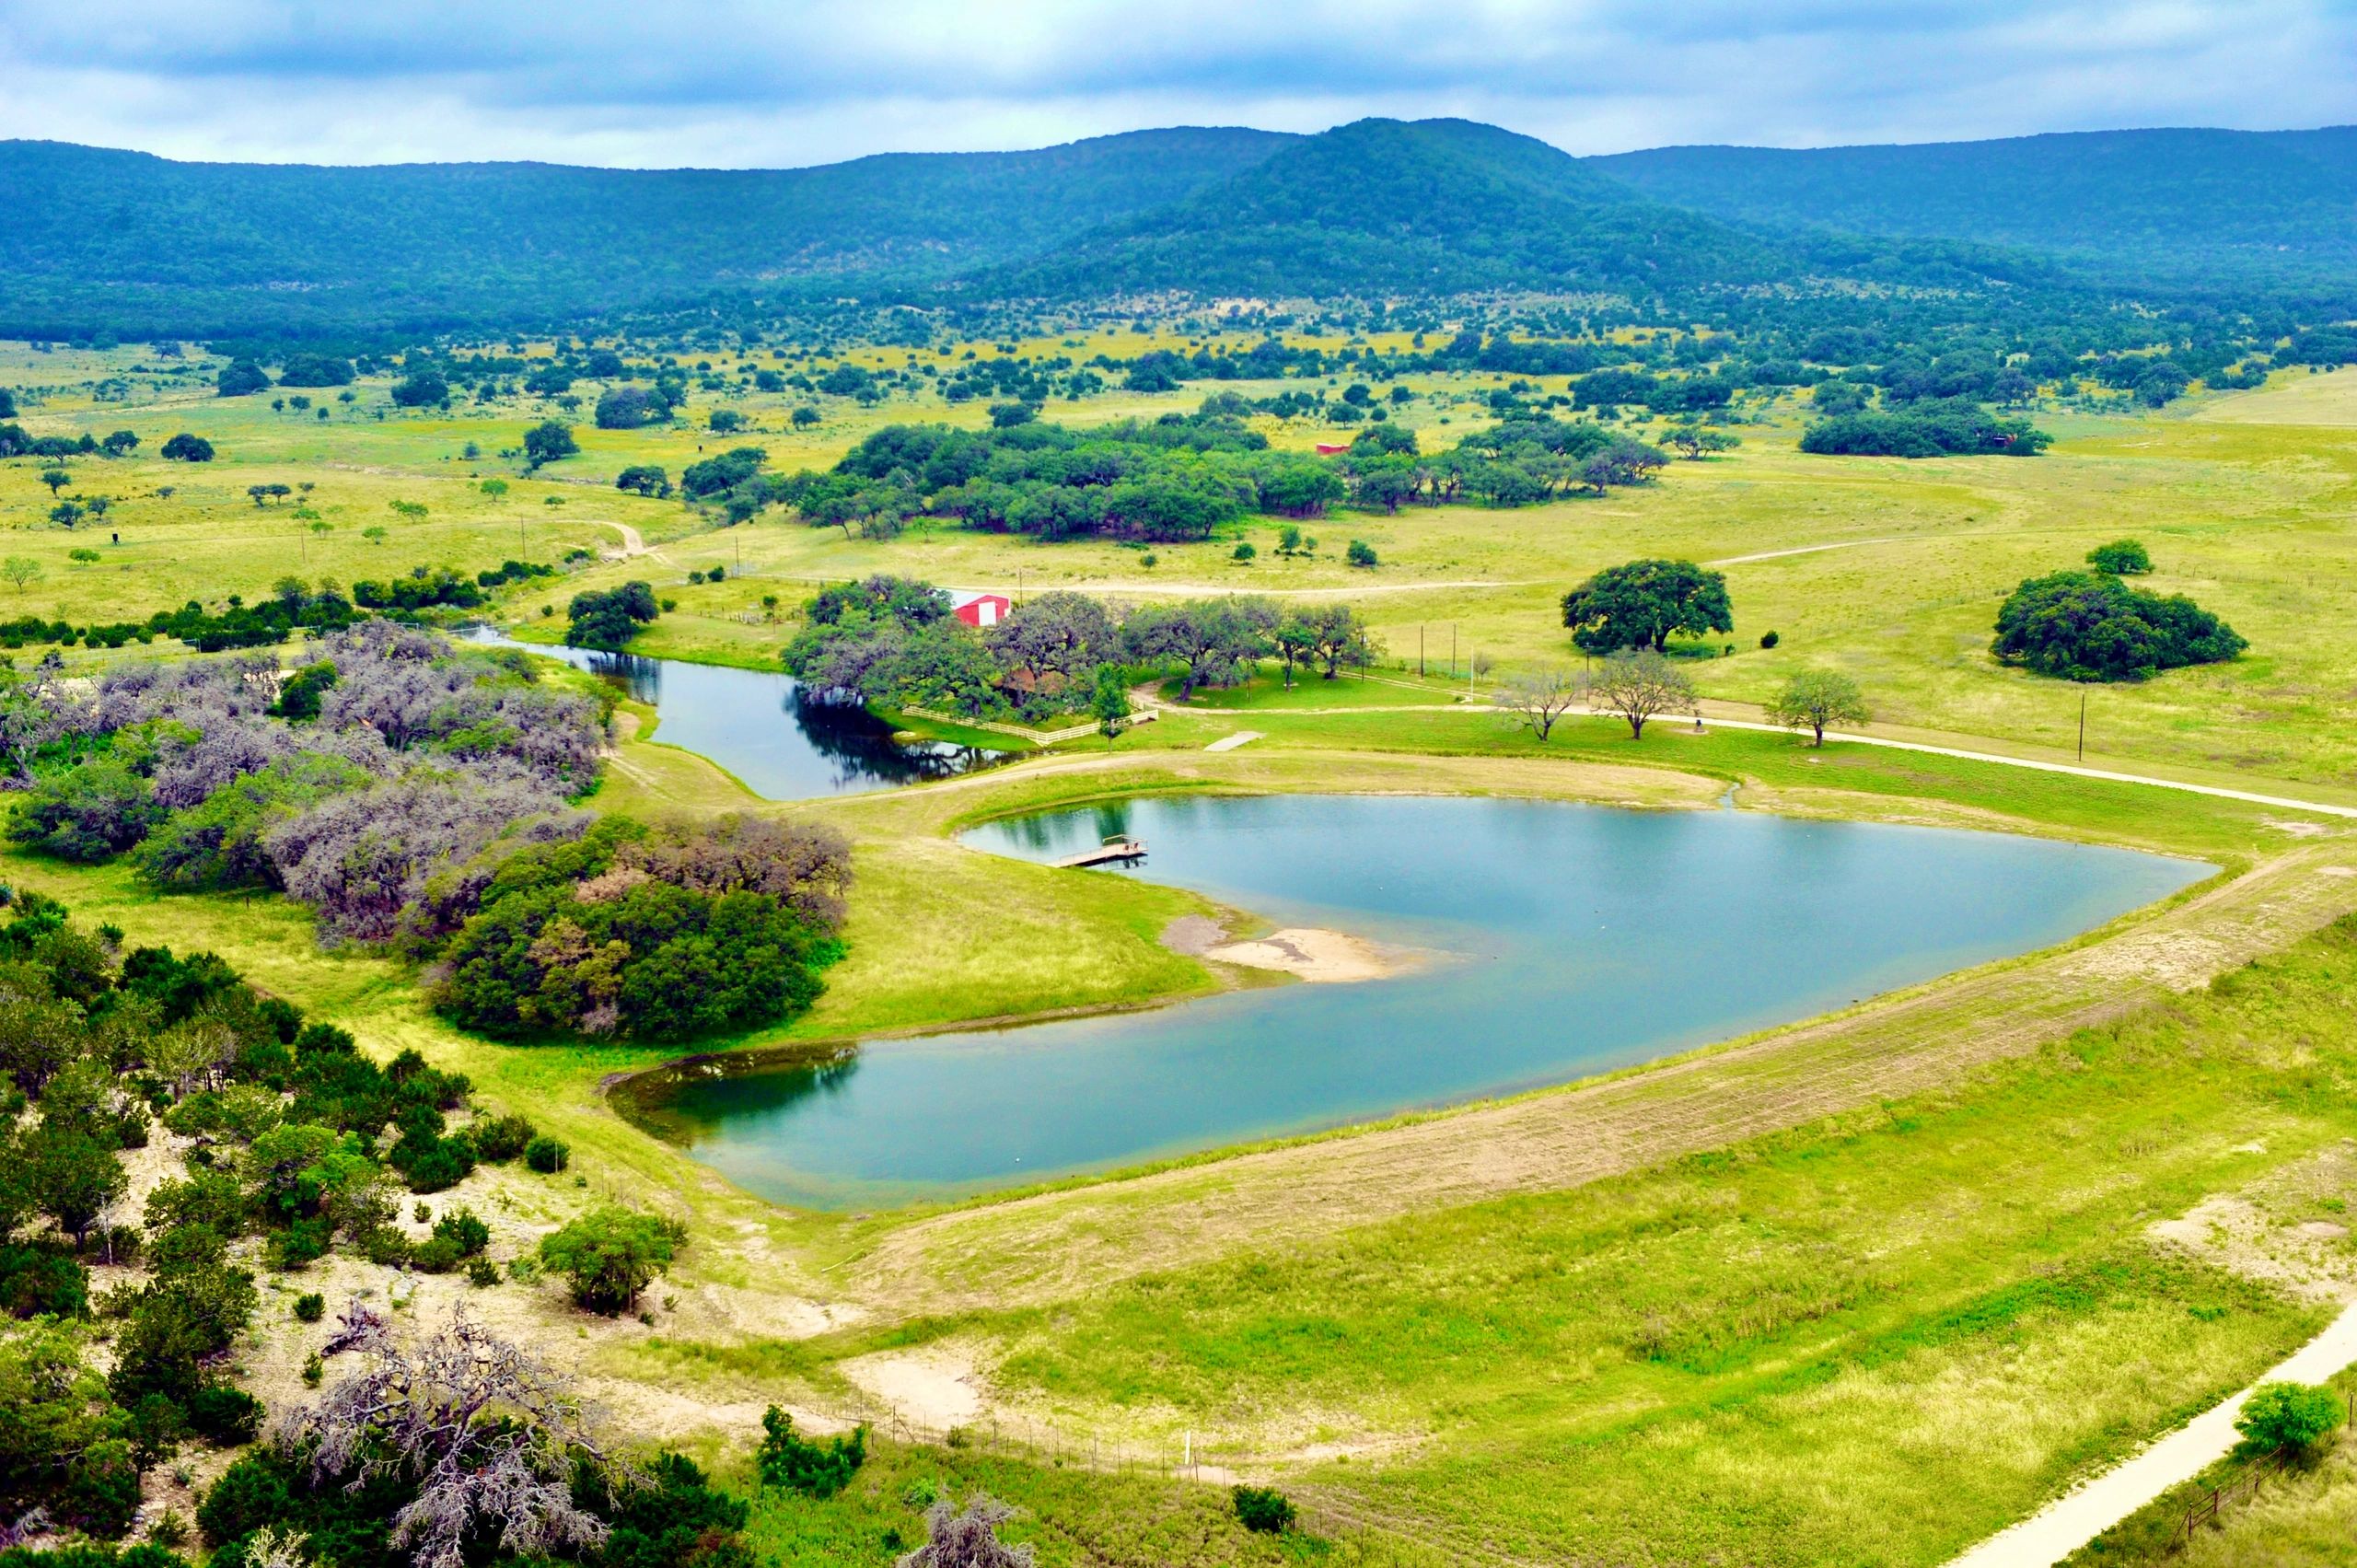 3R Sodbusters pond surrounded by green grass with a beautiful view of the Hill Country